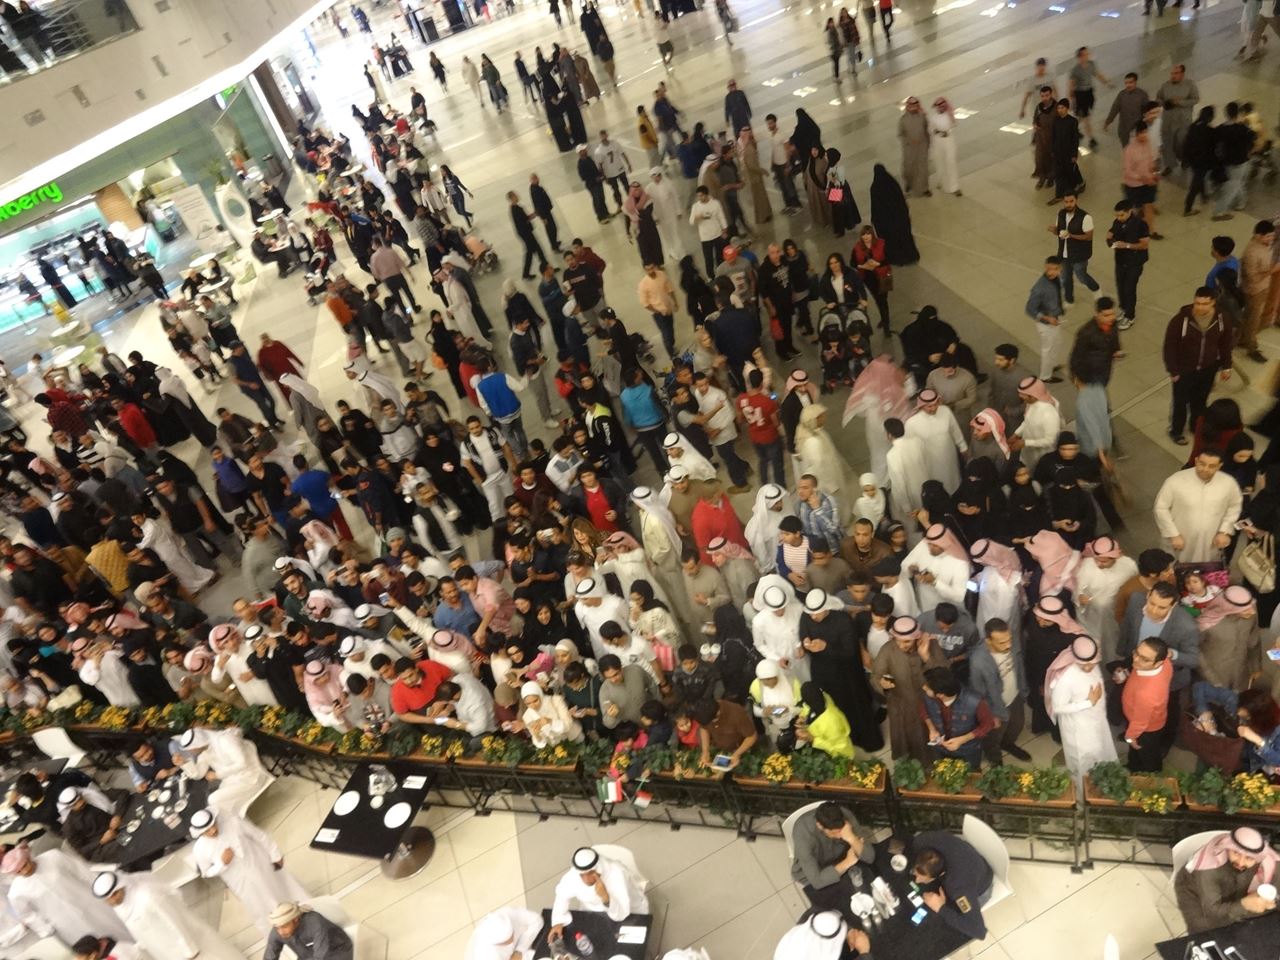 Video ... Prince Fazza's visit to the Avenues causes a huge crowd